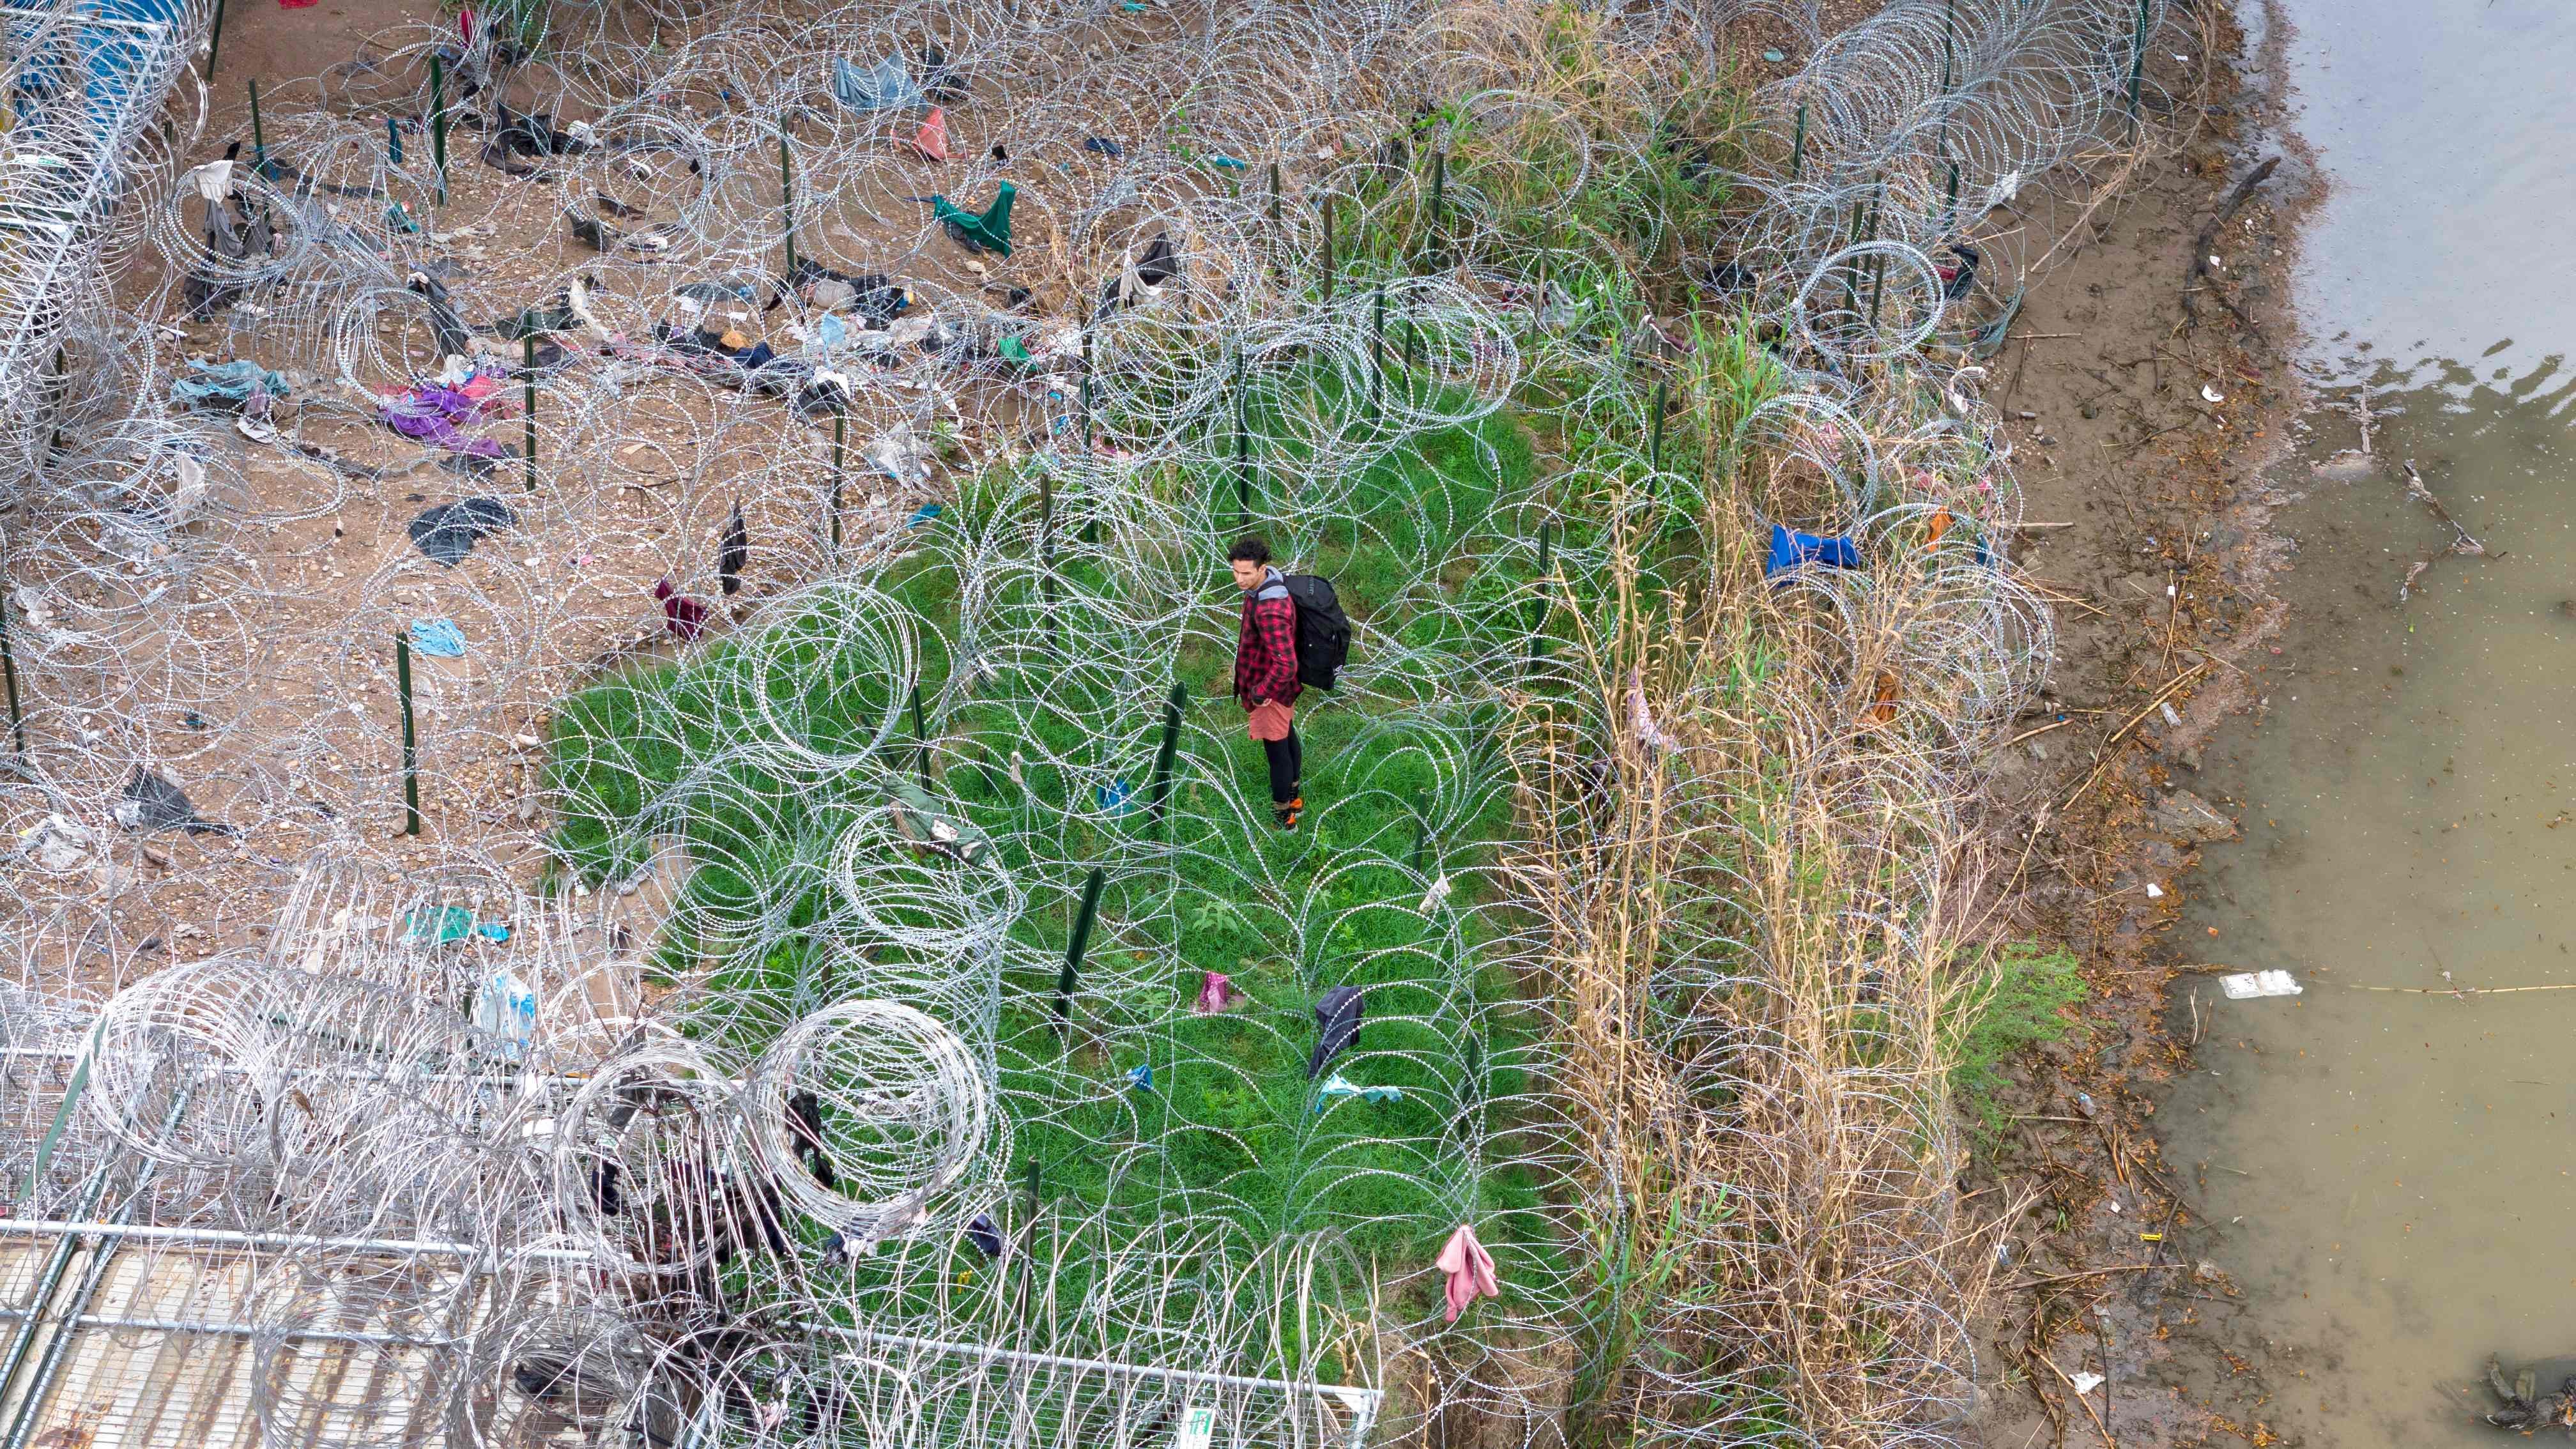 An immigrant faces coils of razor wire after crossing the Rio Grande from Mexico into the United States on March 17 in Eagle Pass, Texas. Texas National Guard troops have fortified Eagle Pass with vast amounts of razor wire as part of Governor Greg Abbott’s “Operation Lone Star” to deter migrants from crossing into Texas. Photo: AFP